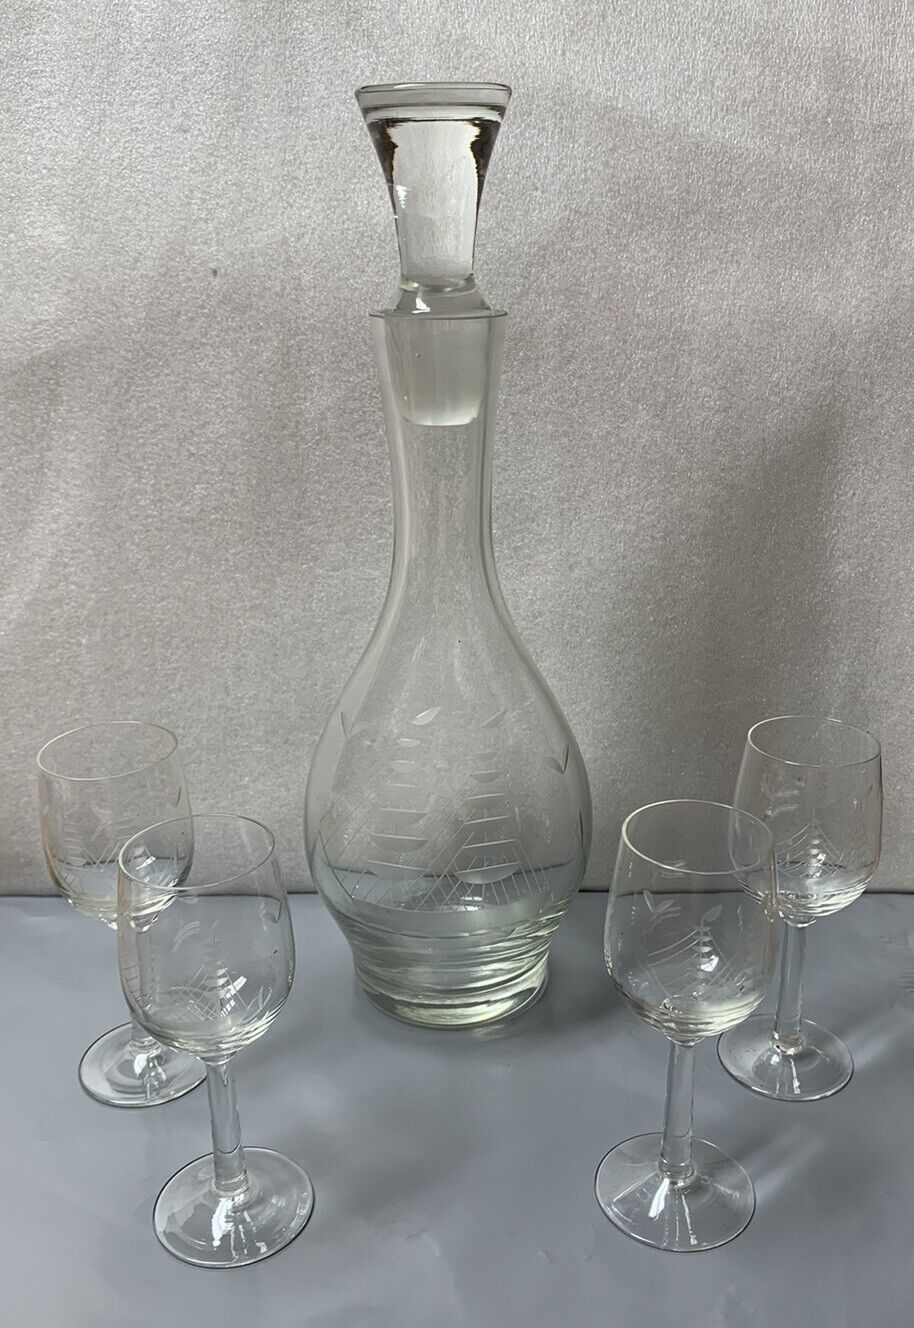 Vintage Decanter Set Etched Ships Cordial Glasses Stopper Clear Glass